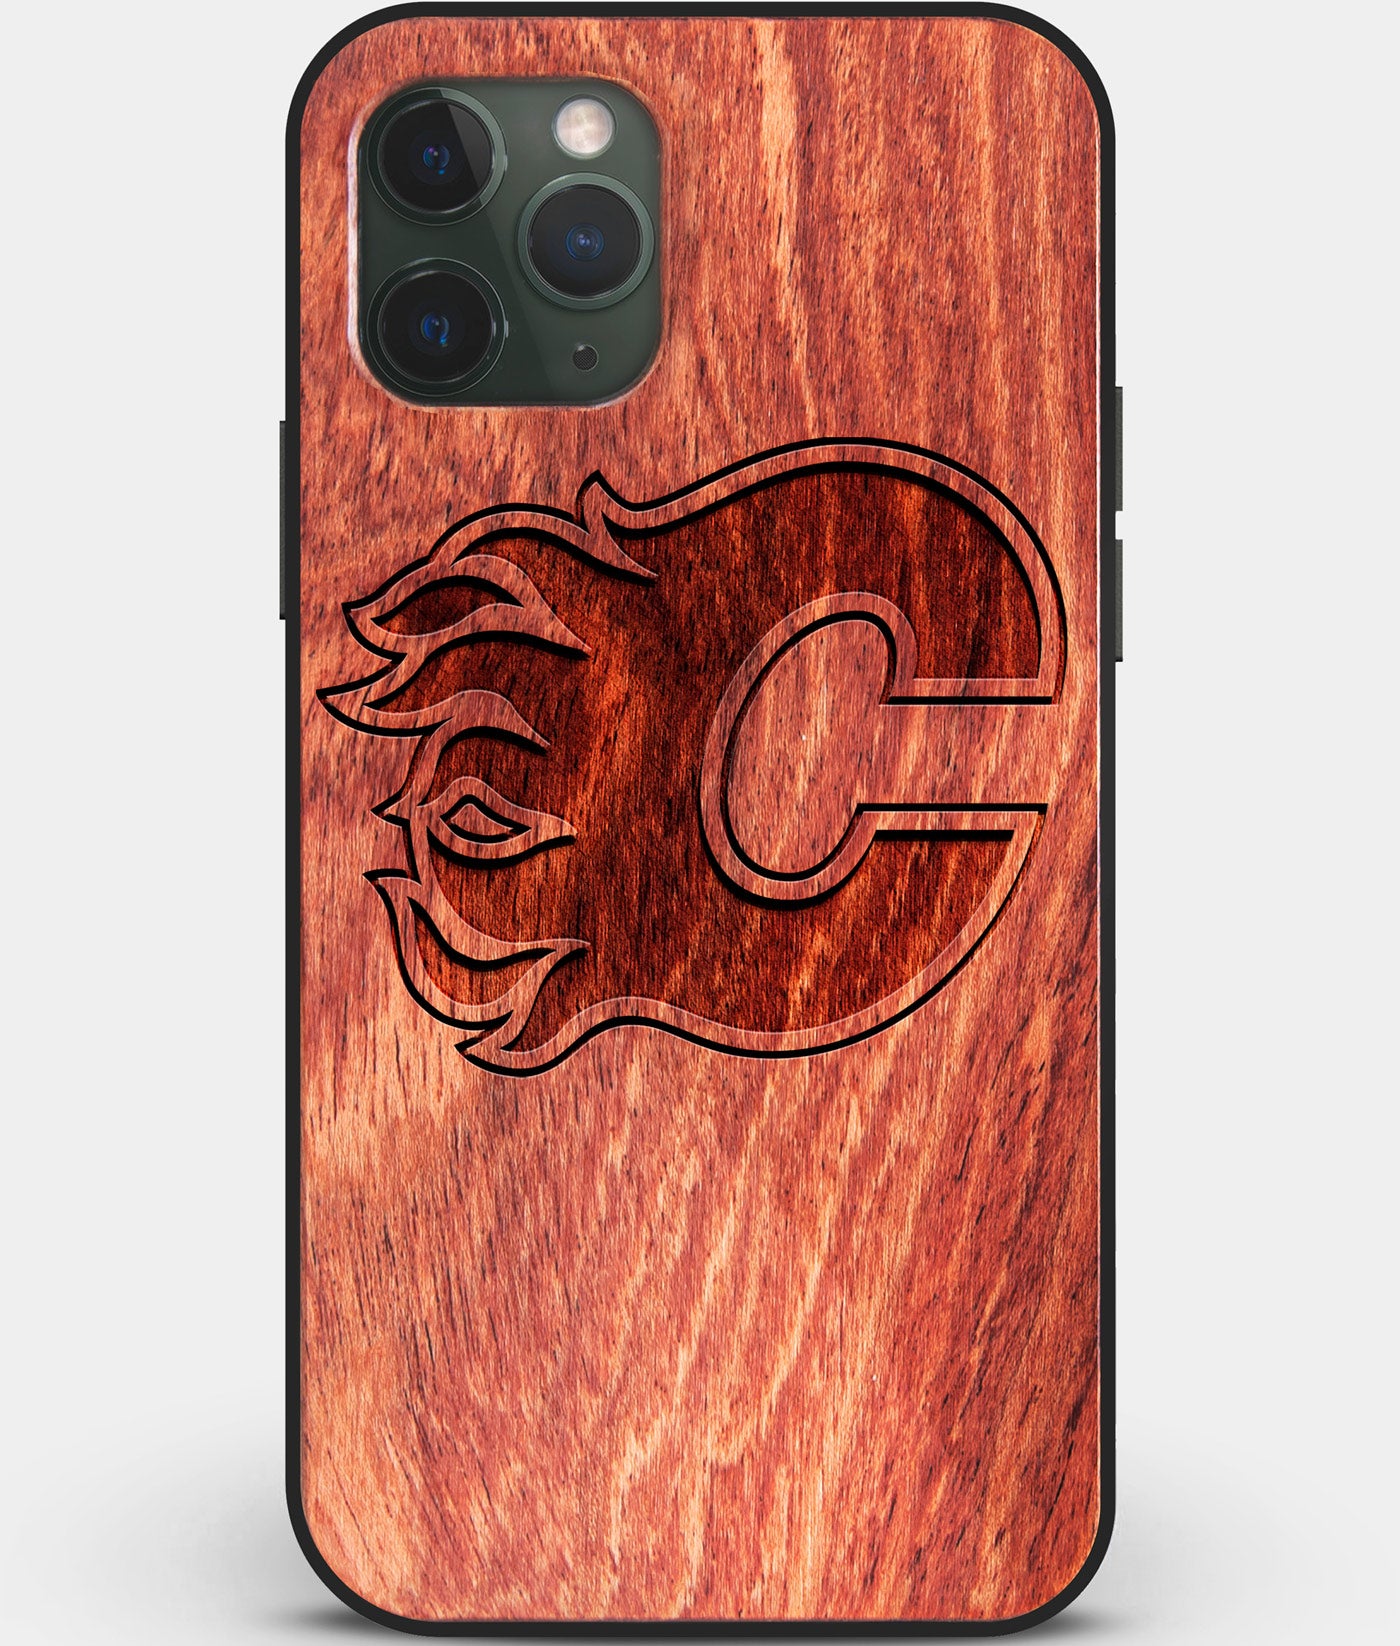 Custom Carved Wood Calgary Flames iPhone 11 Pro Case | Personalized Mahogany Wood Calgary Flames Cover, Birthday Gift, Gifts For Him, Monogrammed Gift For Fan | by Engraved In Nature